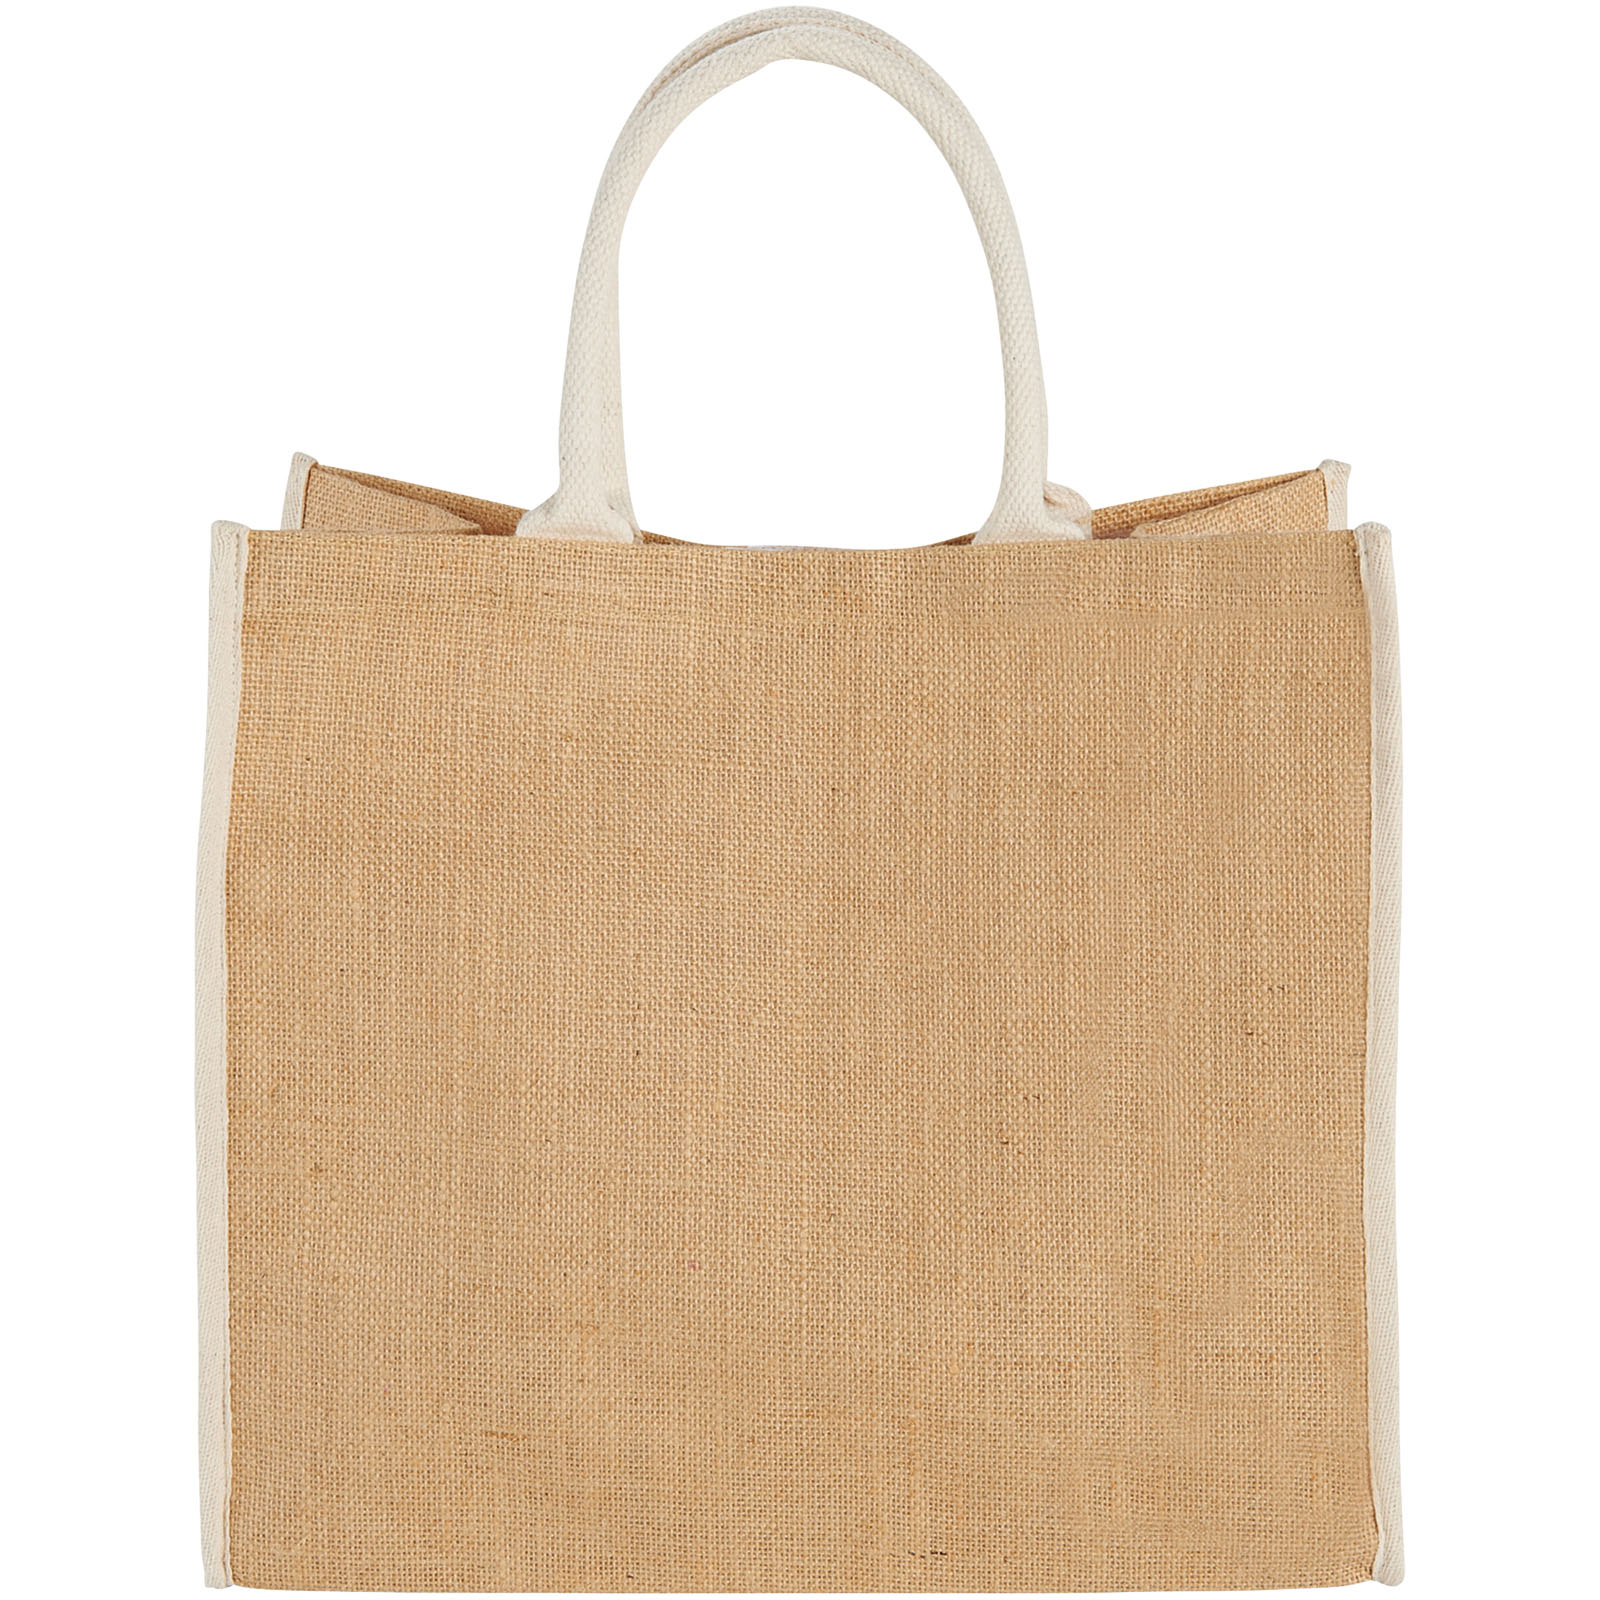 Advertising Shopping & Tote Bags - Harry coloured edge jute tote bag 25L - 1